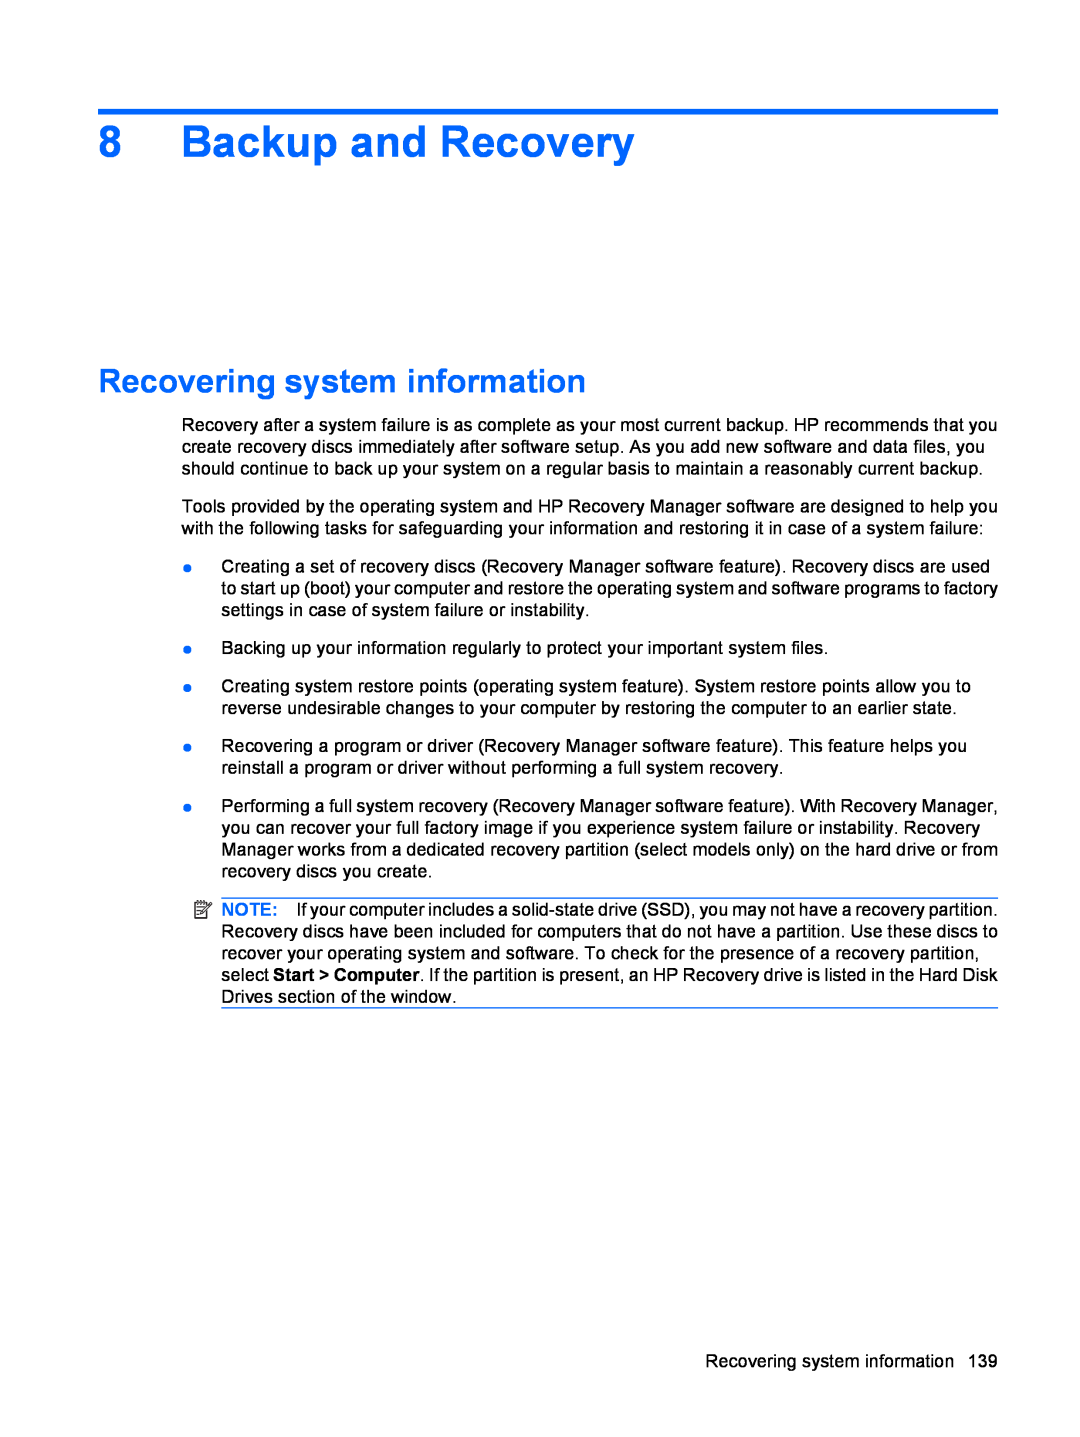 HP DV6 manual Backup and Recovery, Recovering system information 